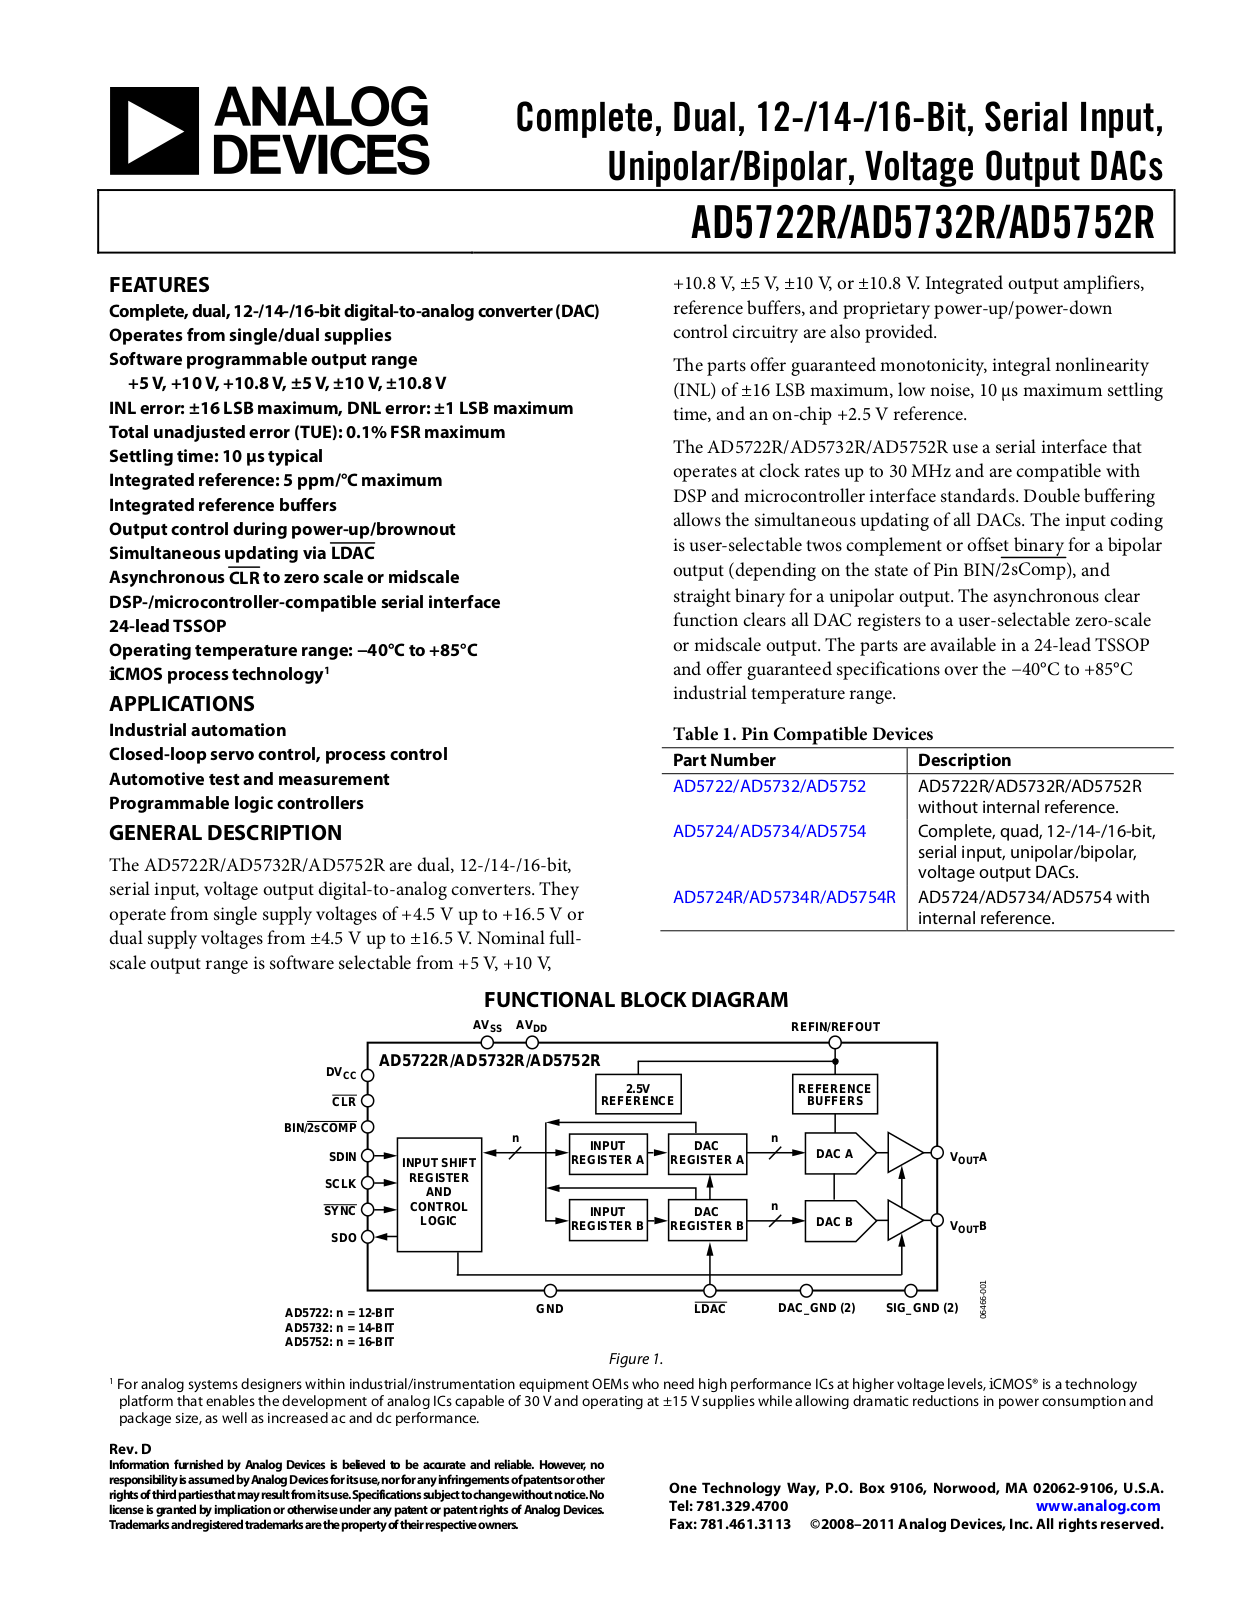 ANALOG DEVICES AD5722R, AD5732R, AD5752 Service Manual